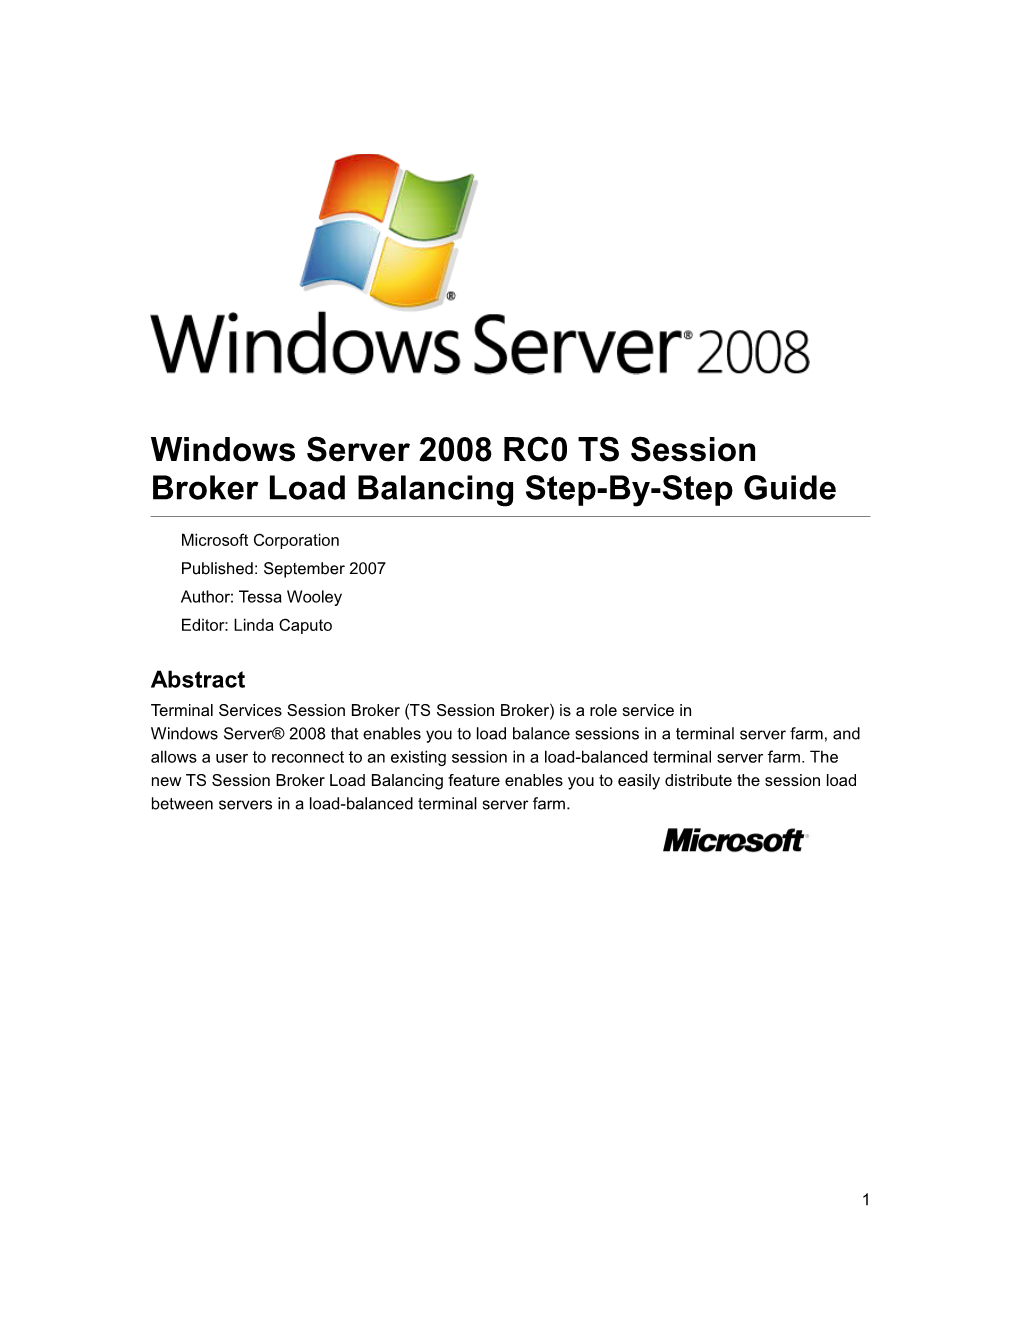 Windows Server 2008 RC0 TS Session Broker Load Balancing Step-By-Step Guide